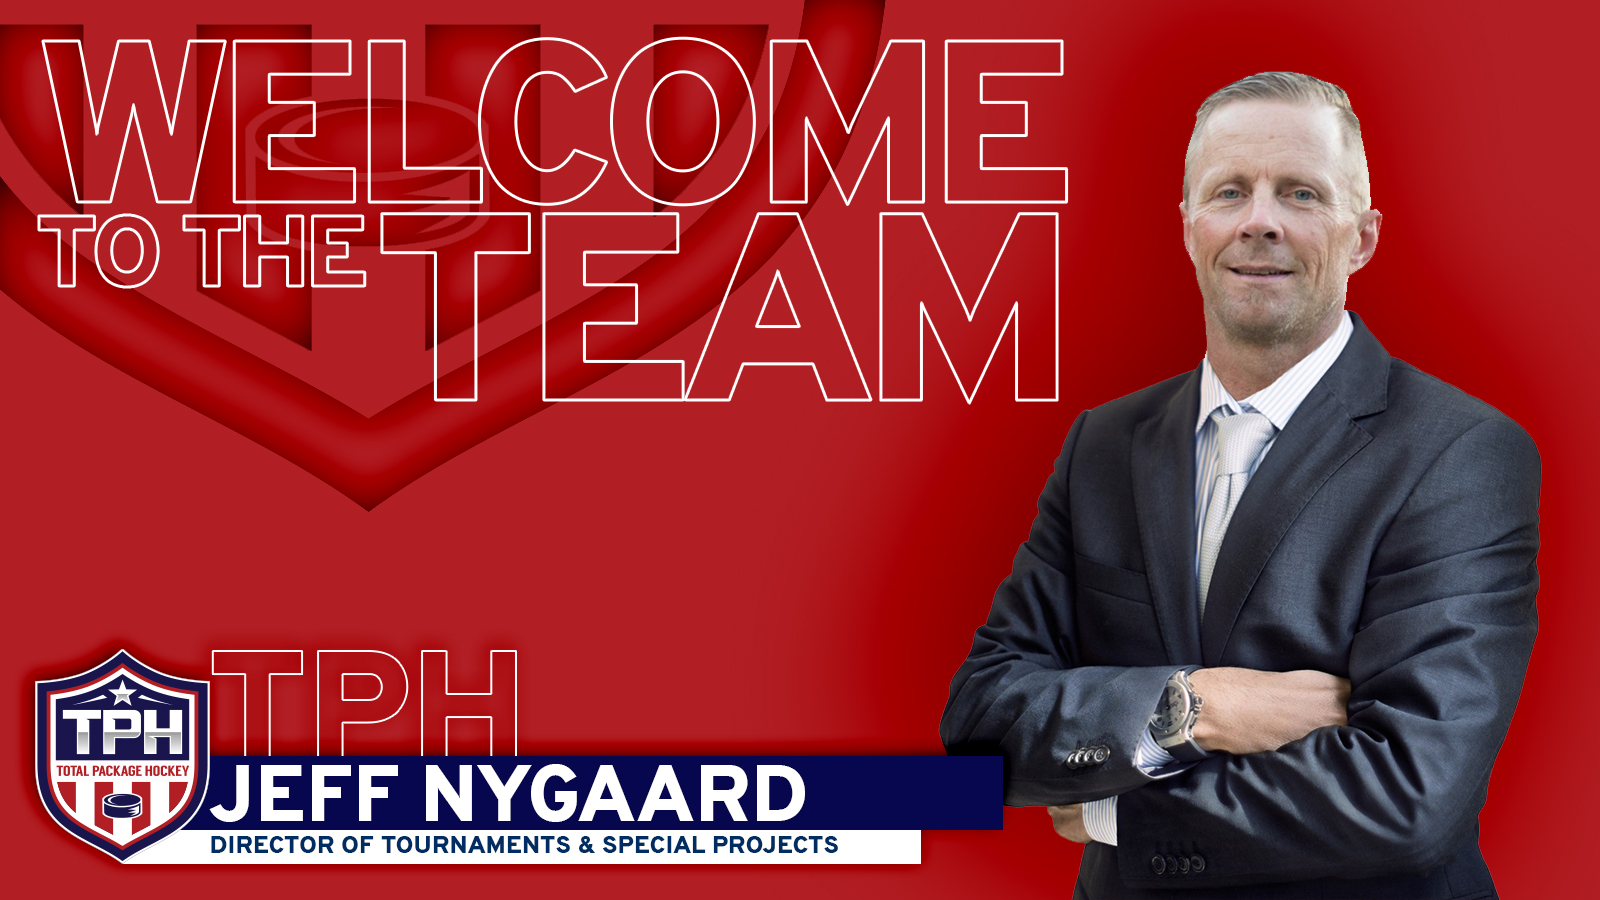 Welcome to the Team - Nygaard